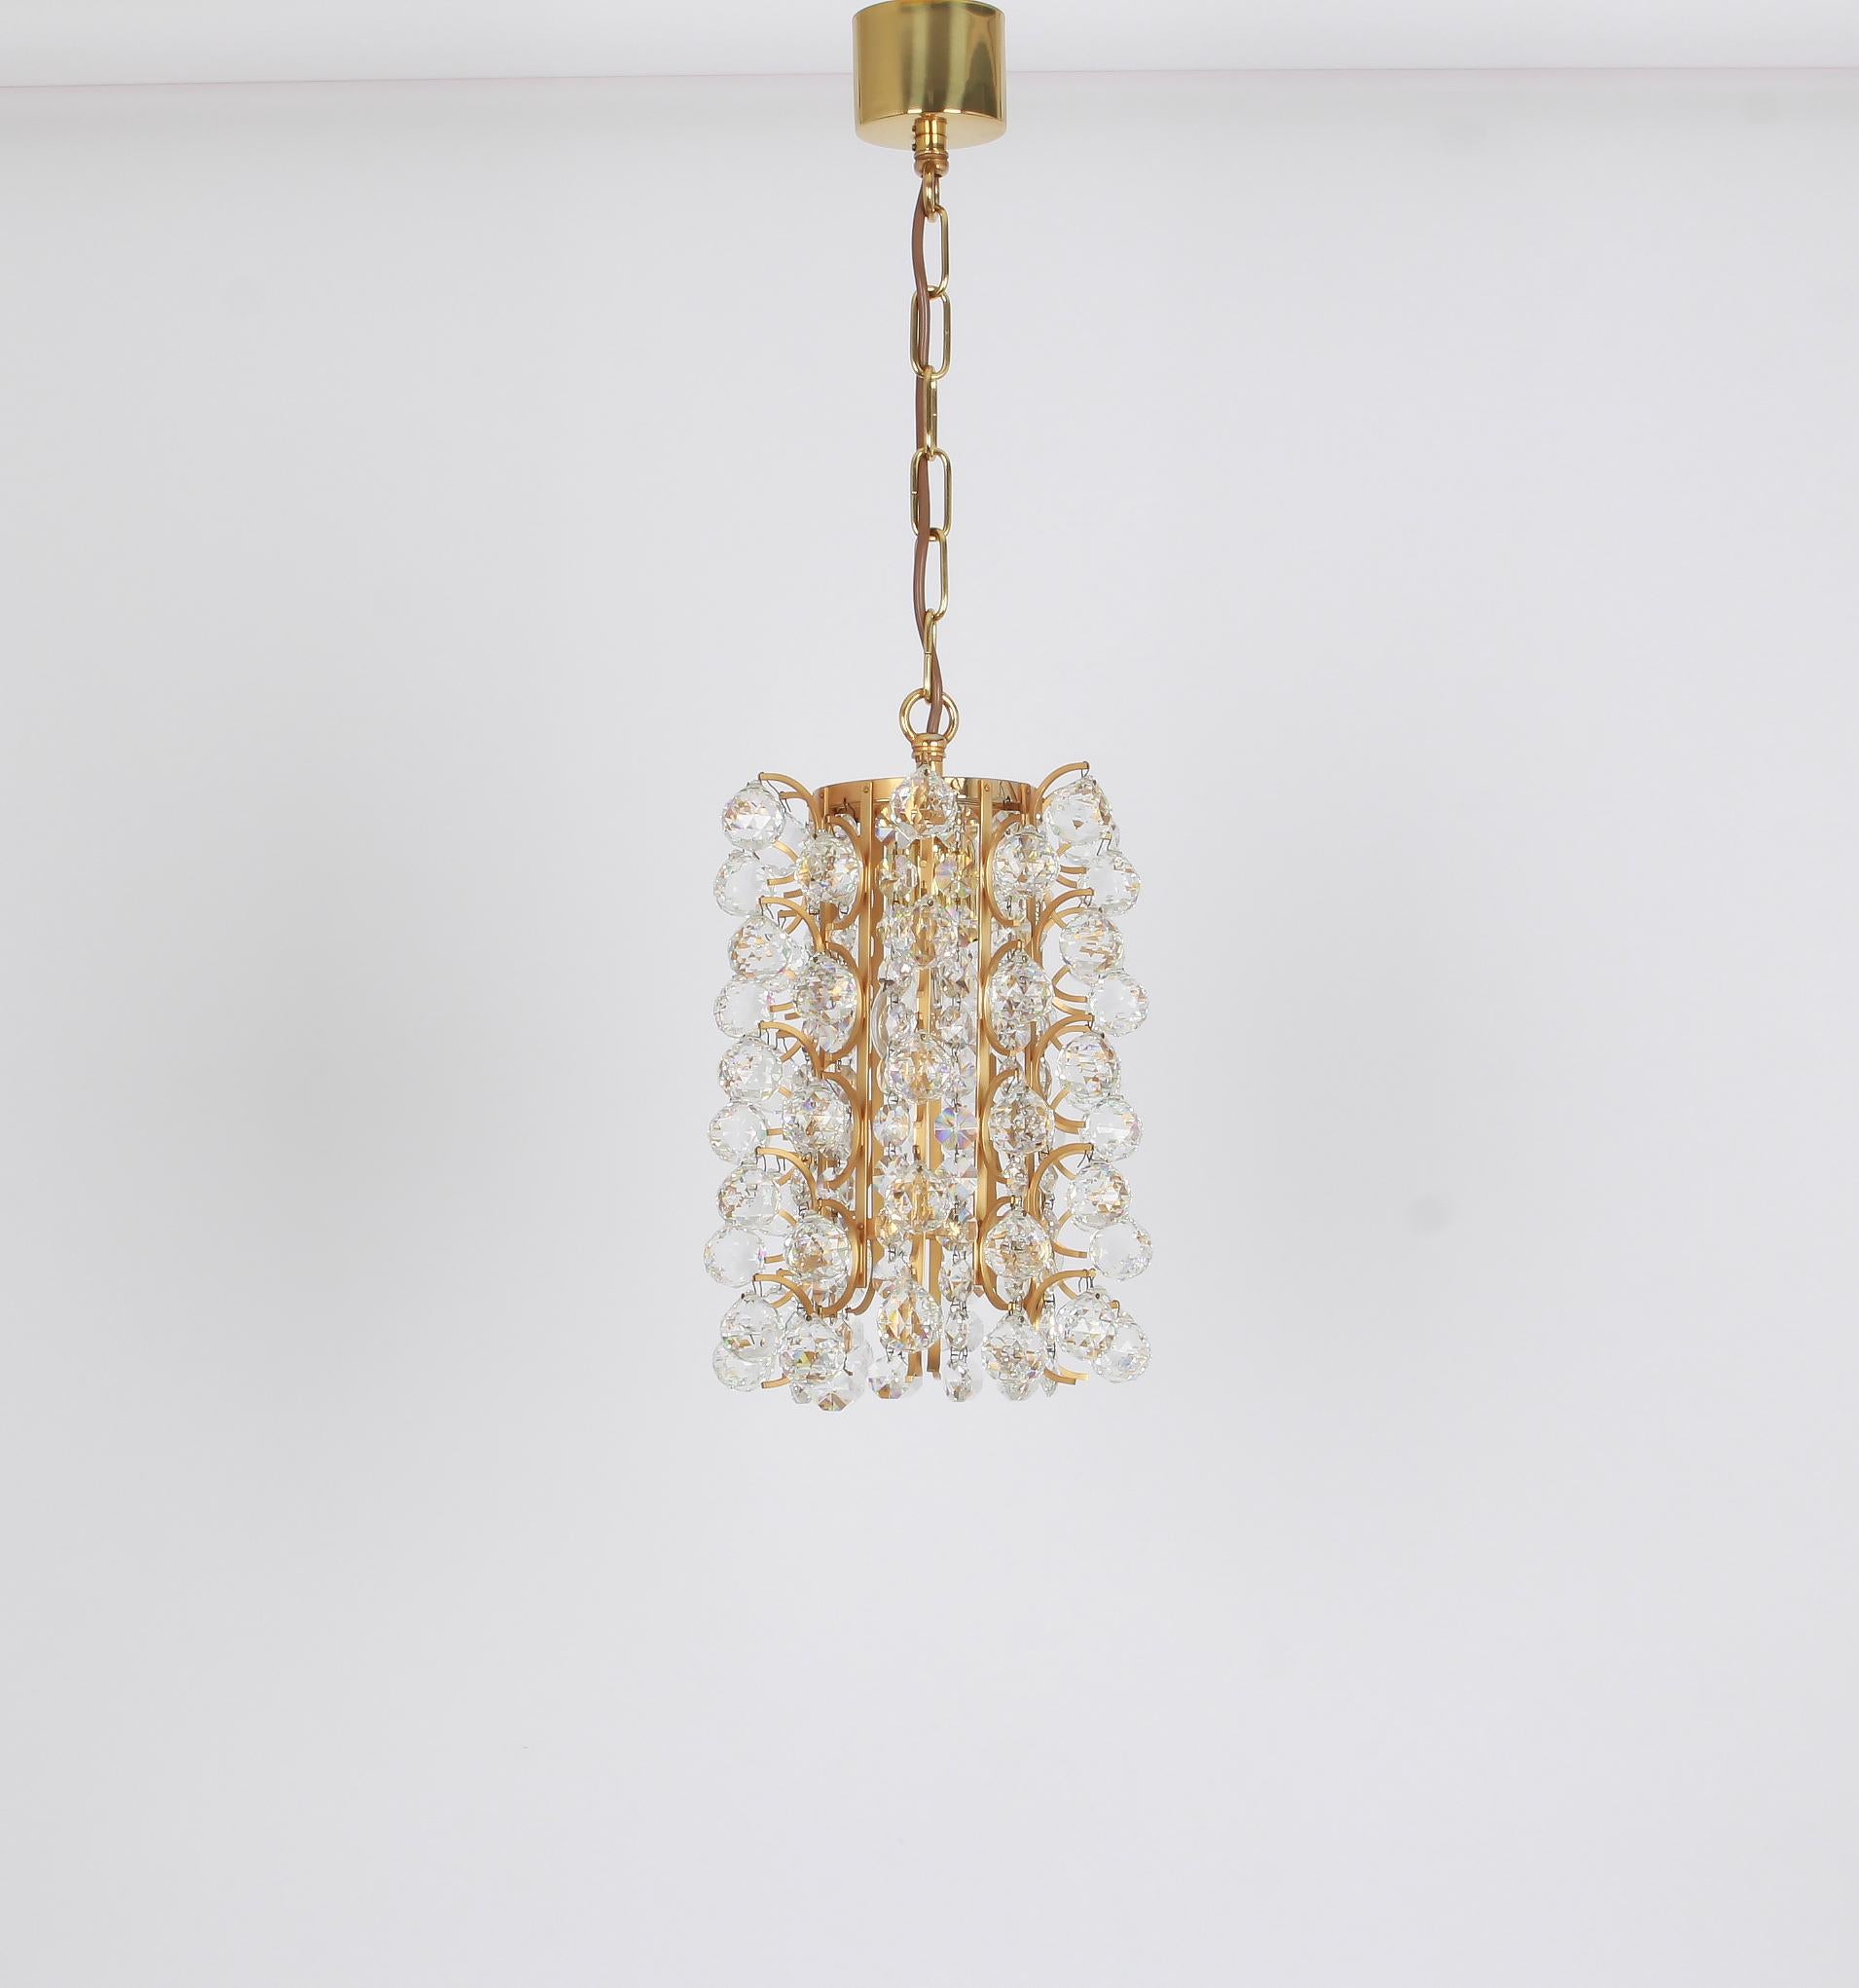 Christoph Palme pendant light in very good condition-, Germany, manufactured in the 1970s. It’s composed of crystal glass elements enclosed in a gilded brass frame.
One standard bulb (E-26/E-27) per fixture.
Height of the pendant only is